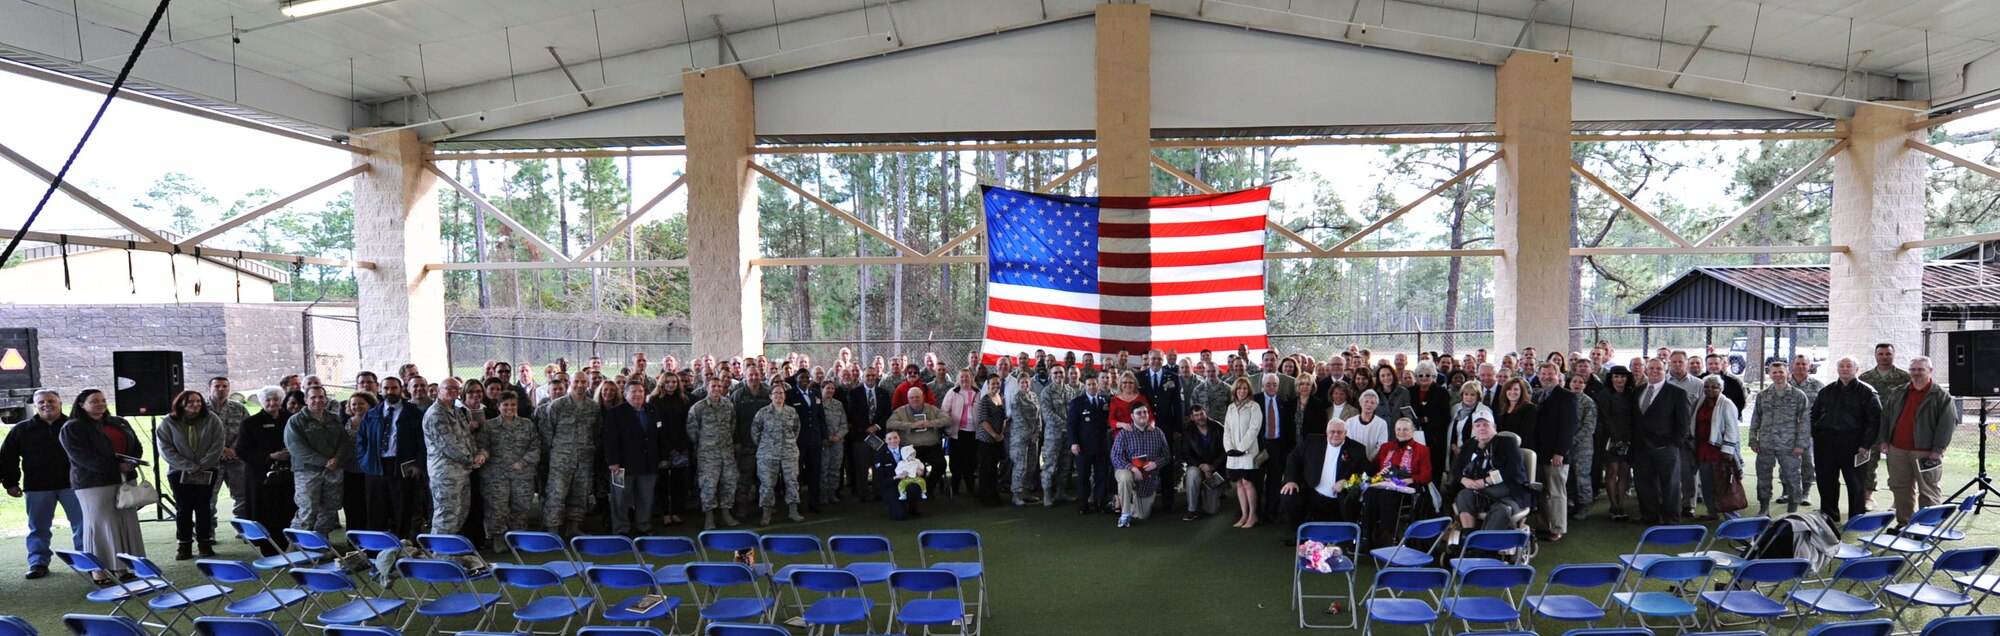 The adopted family of Chief Master Sgt. Francis A. Dailey II, superintendent of 361st Intelligence Surveillance and Reconnaissance Group, gather together for a last photo during his retirement ceremony at Hurlburt Field, Fla, Feb. 14, 2013. Dailey was one of the last active-duty members of the defense aerial gunner career field for the B-52 Stratofortress. (U.S. Air Force photo/Senior Airman Desiree Moye) 